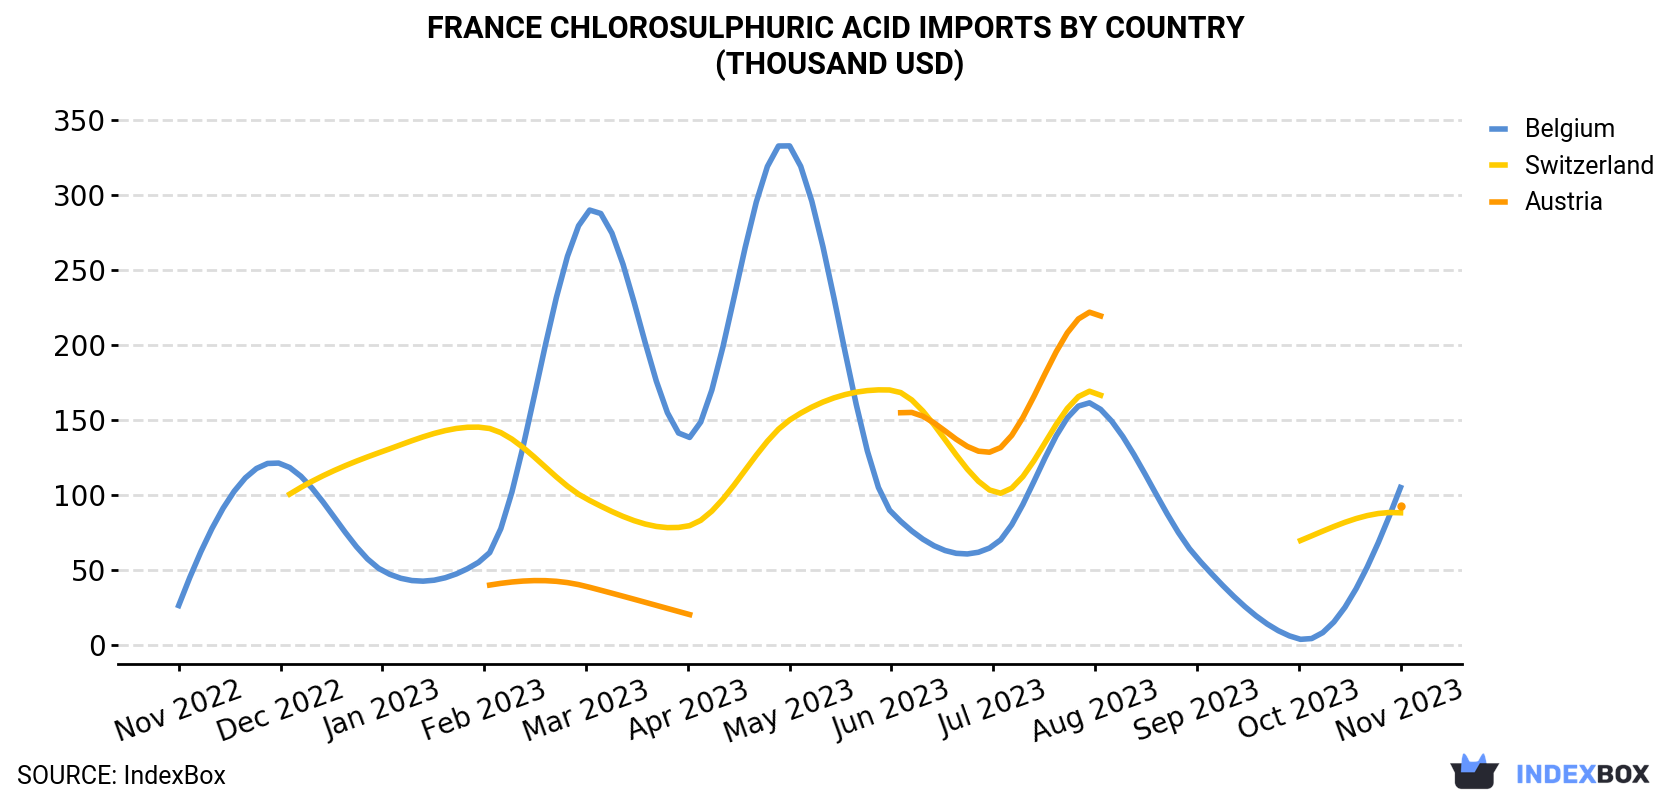 France Chlorosulphuric Acid Imports By Country (Thousand USD)